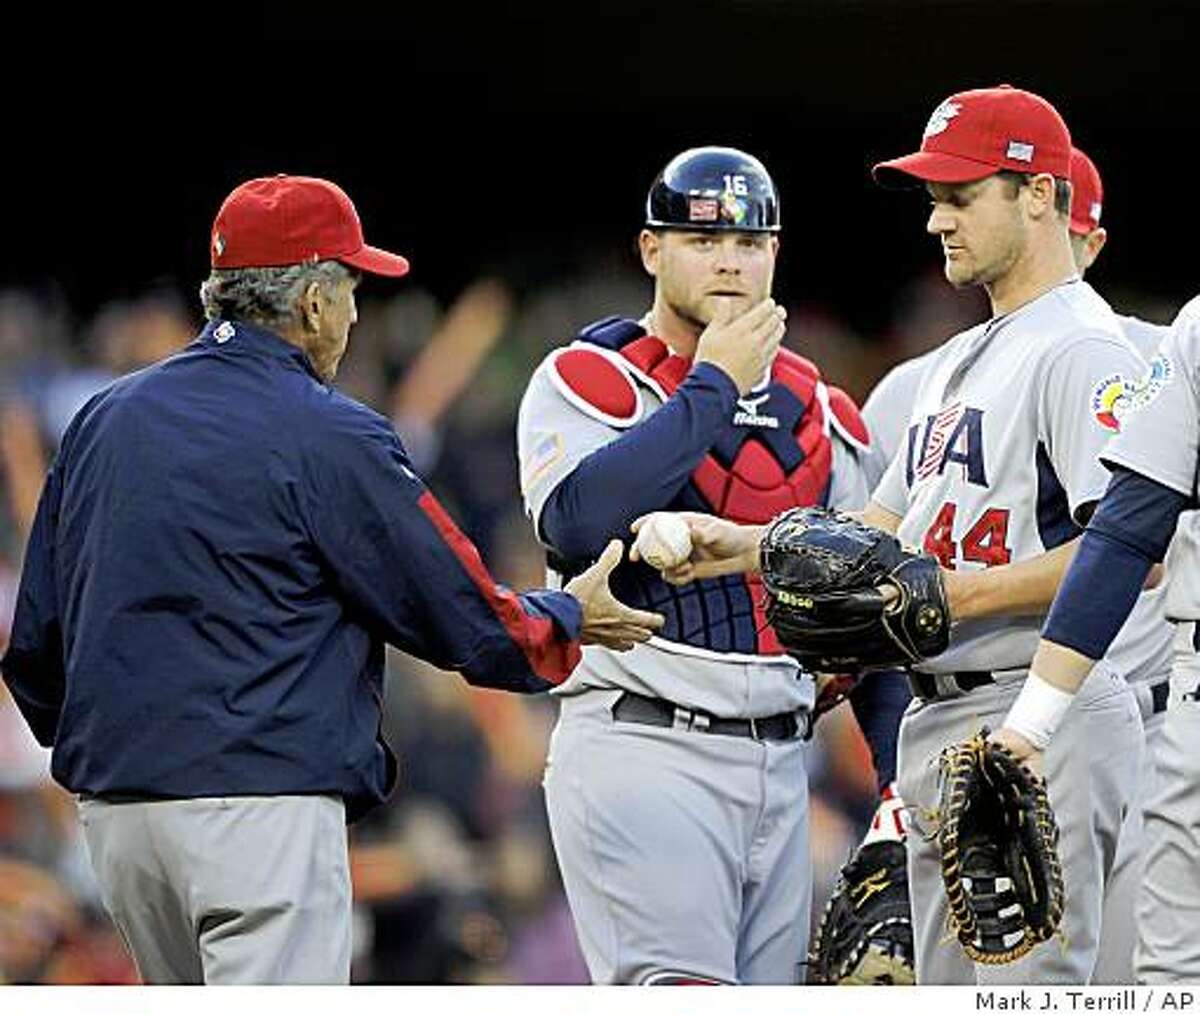 Sayonara! US ousted by Japan in WBC semifinals - The San Diego Union-Tribune